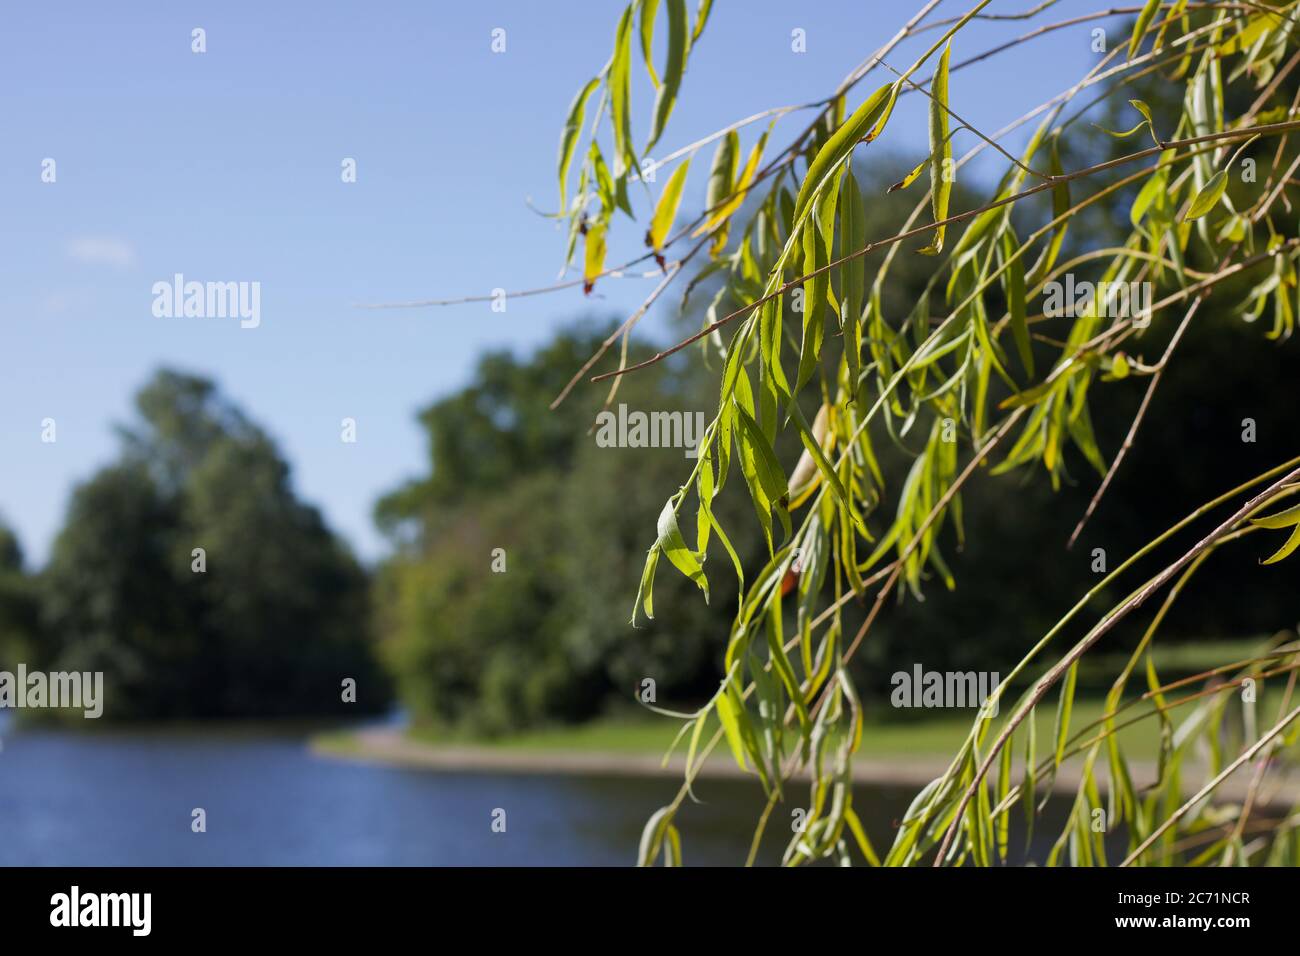 Weeping willow foliage in foreground with lake and grass in background Stock Photo